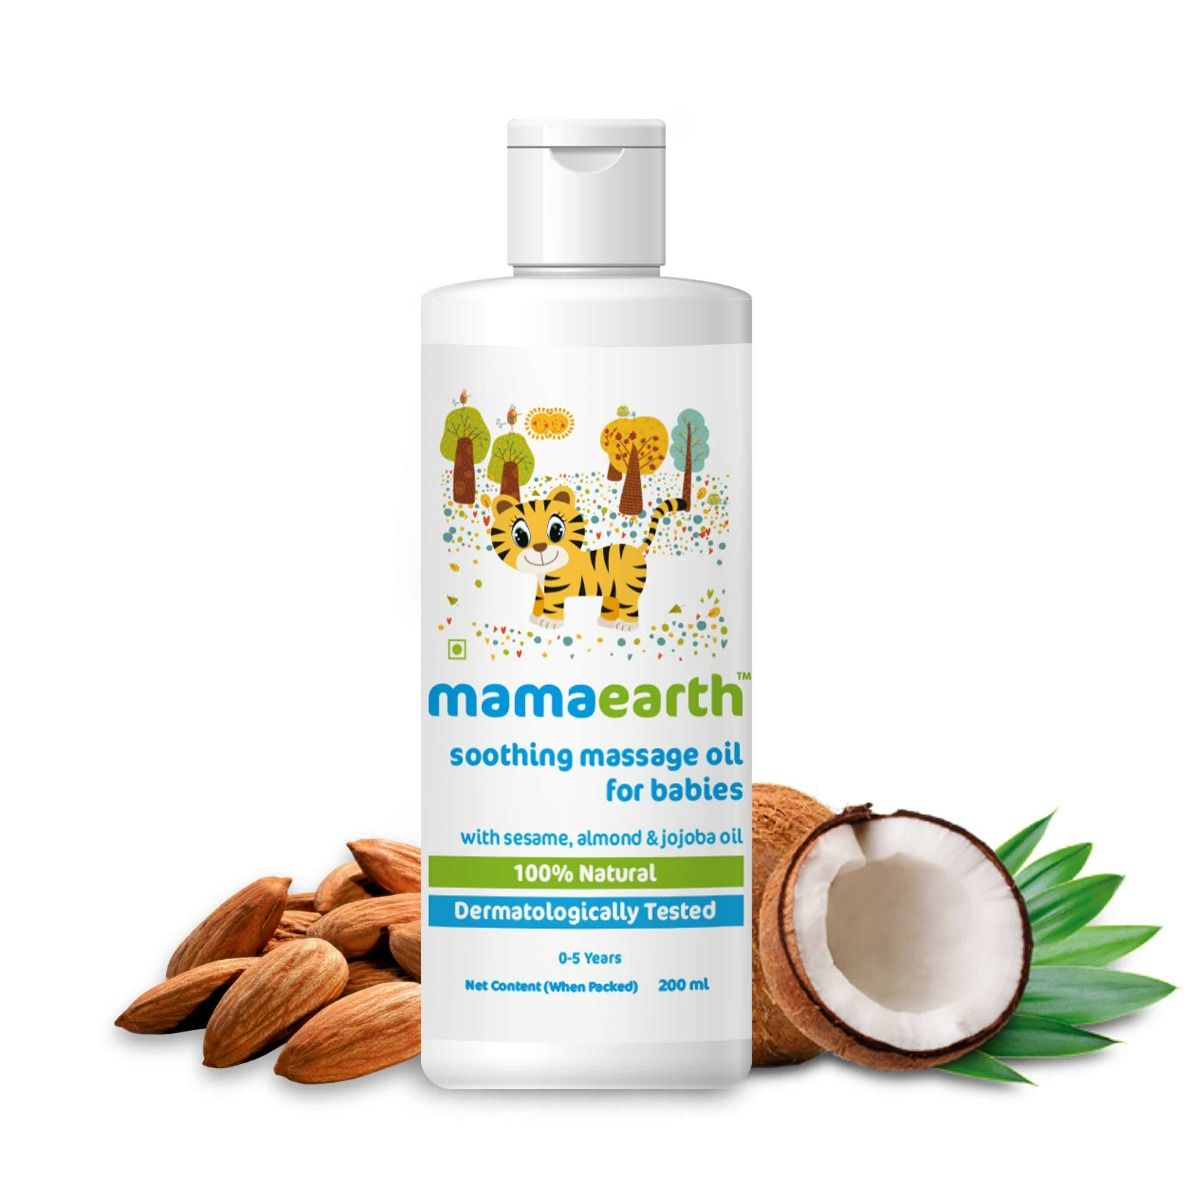 Buy Mamaearth Soothing Massage Oil For Babies with Sesame, Almond & Jojoba Oil, 0 to 5 Years, 200 ml Online